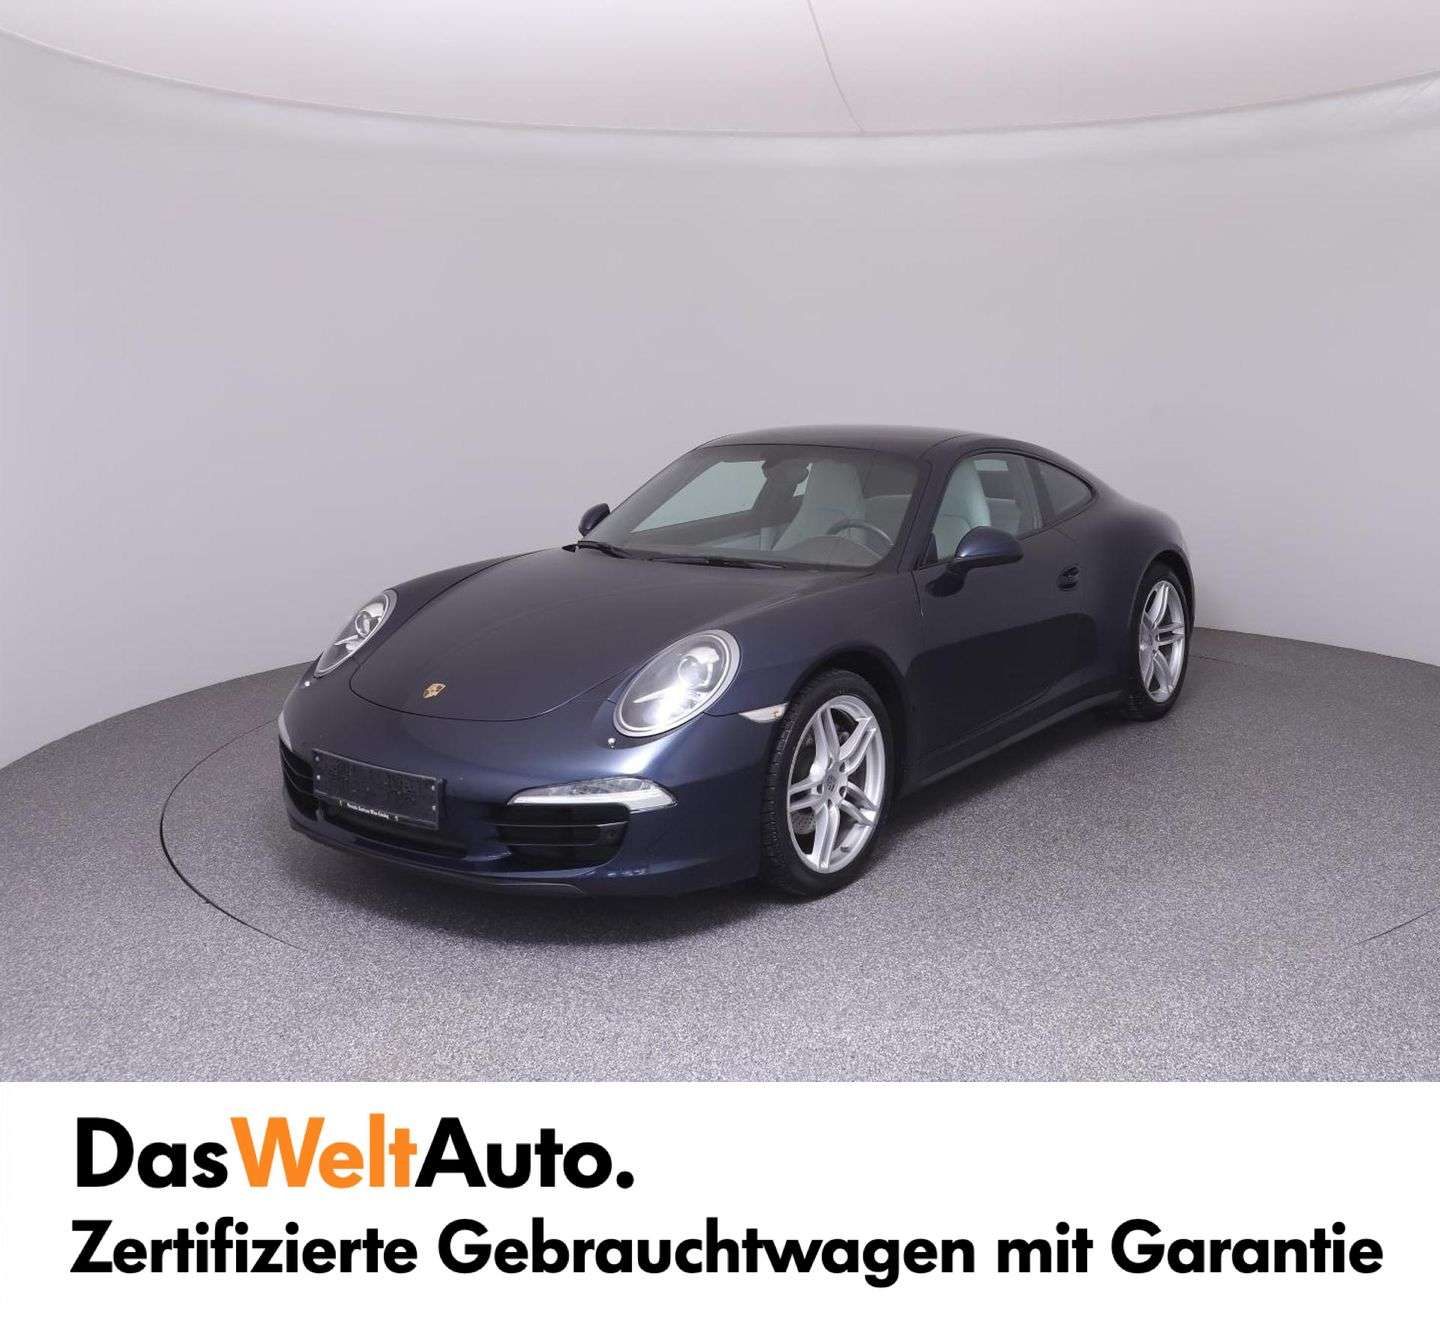 Porsche 911 Coupe in Blue used in Wien for € 79,990.-